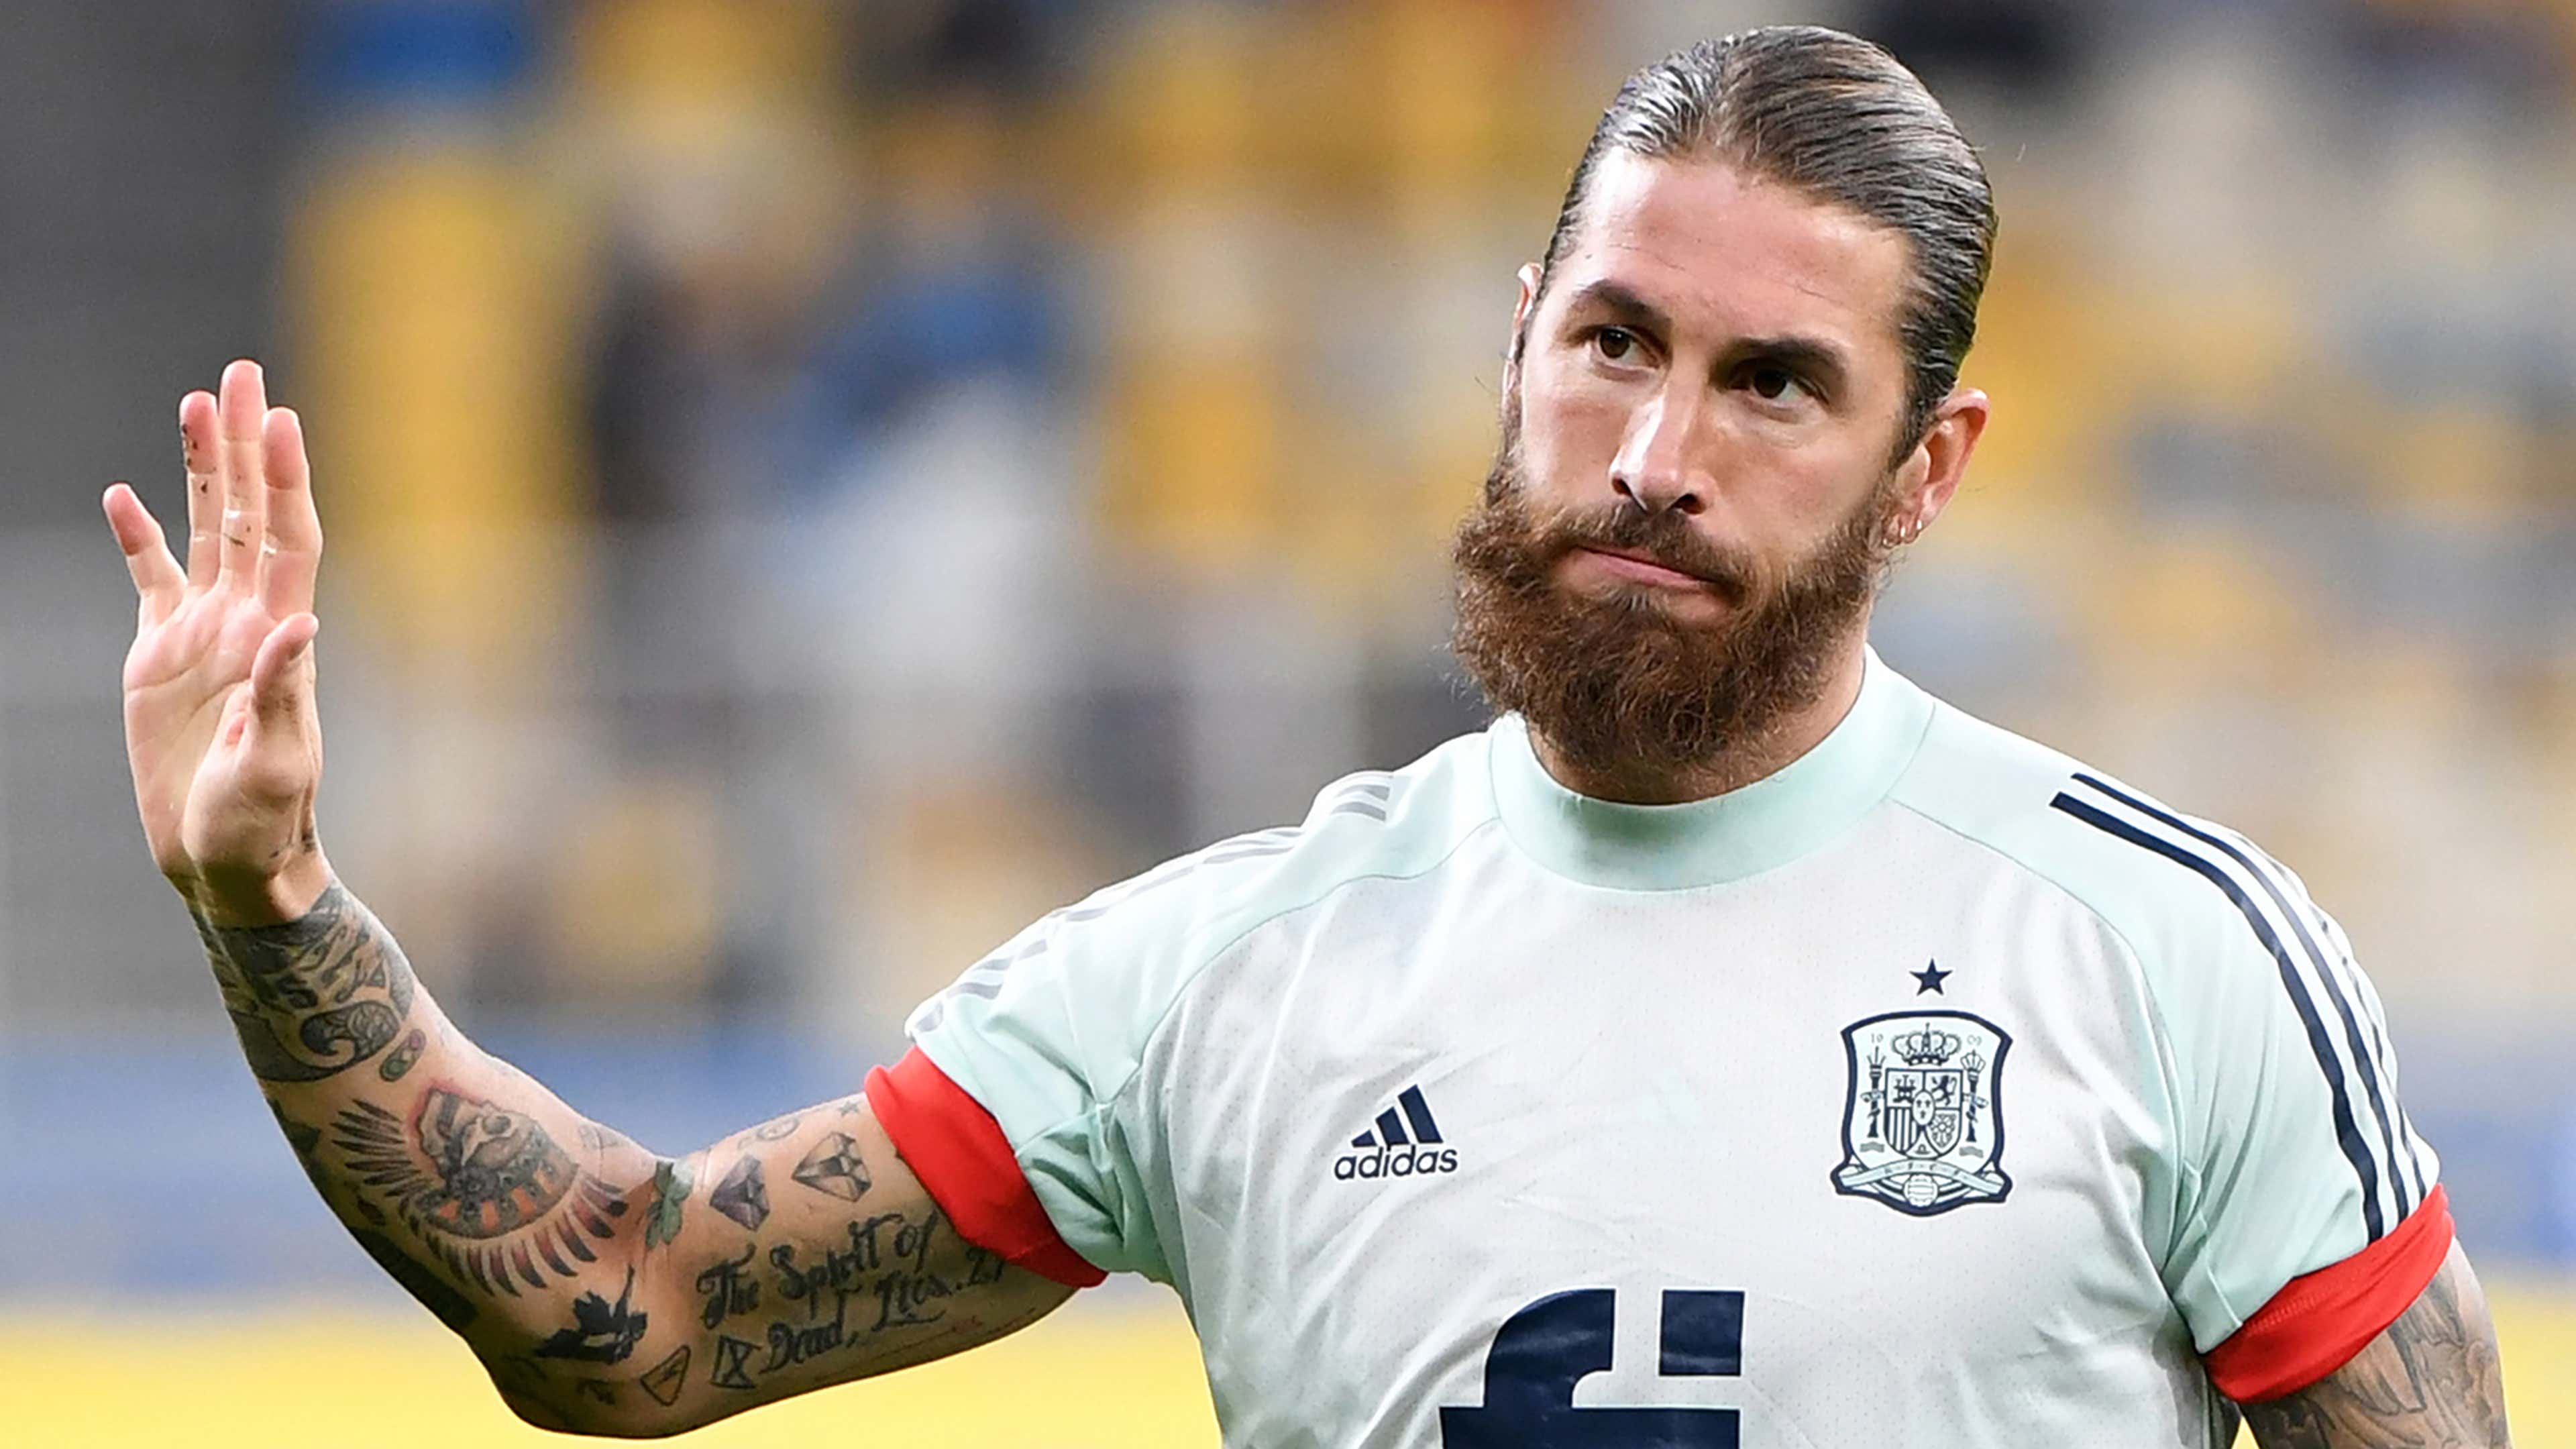 Thank you from the bottom of my heart!' - Spain legend Sergio Ramos retires from international football after trophy filled career | Goal.com UK